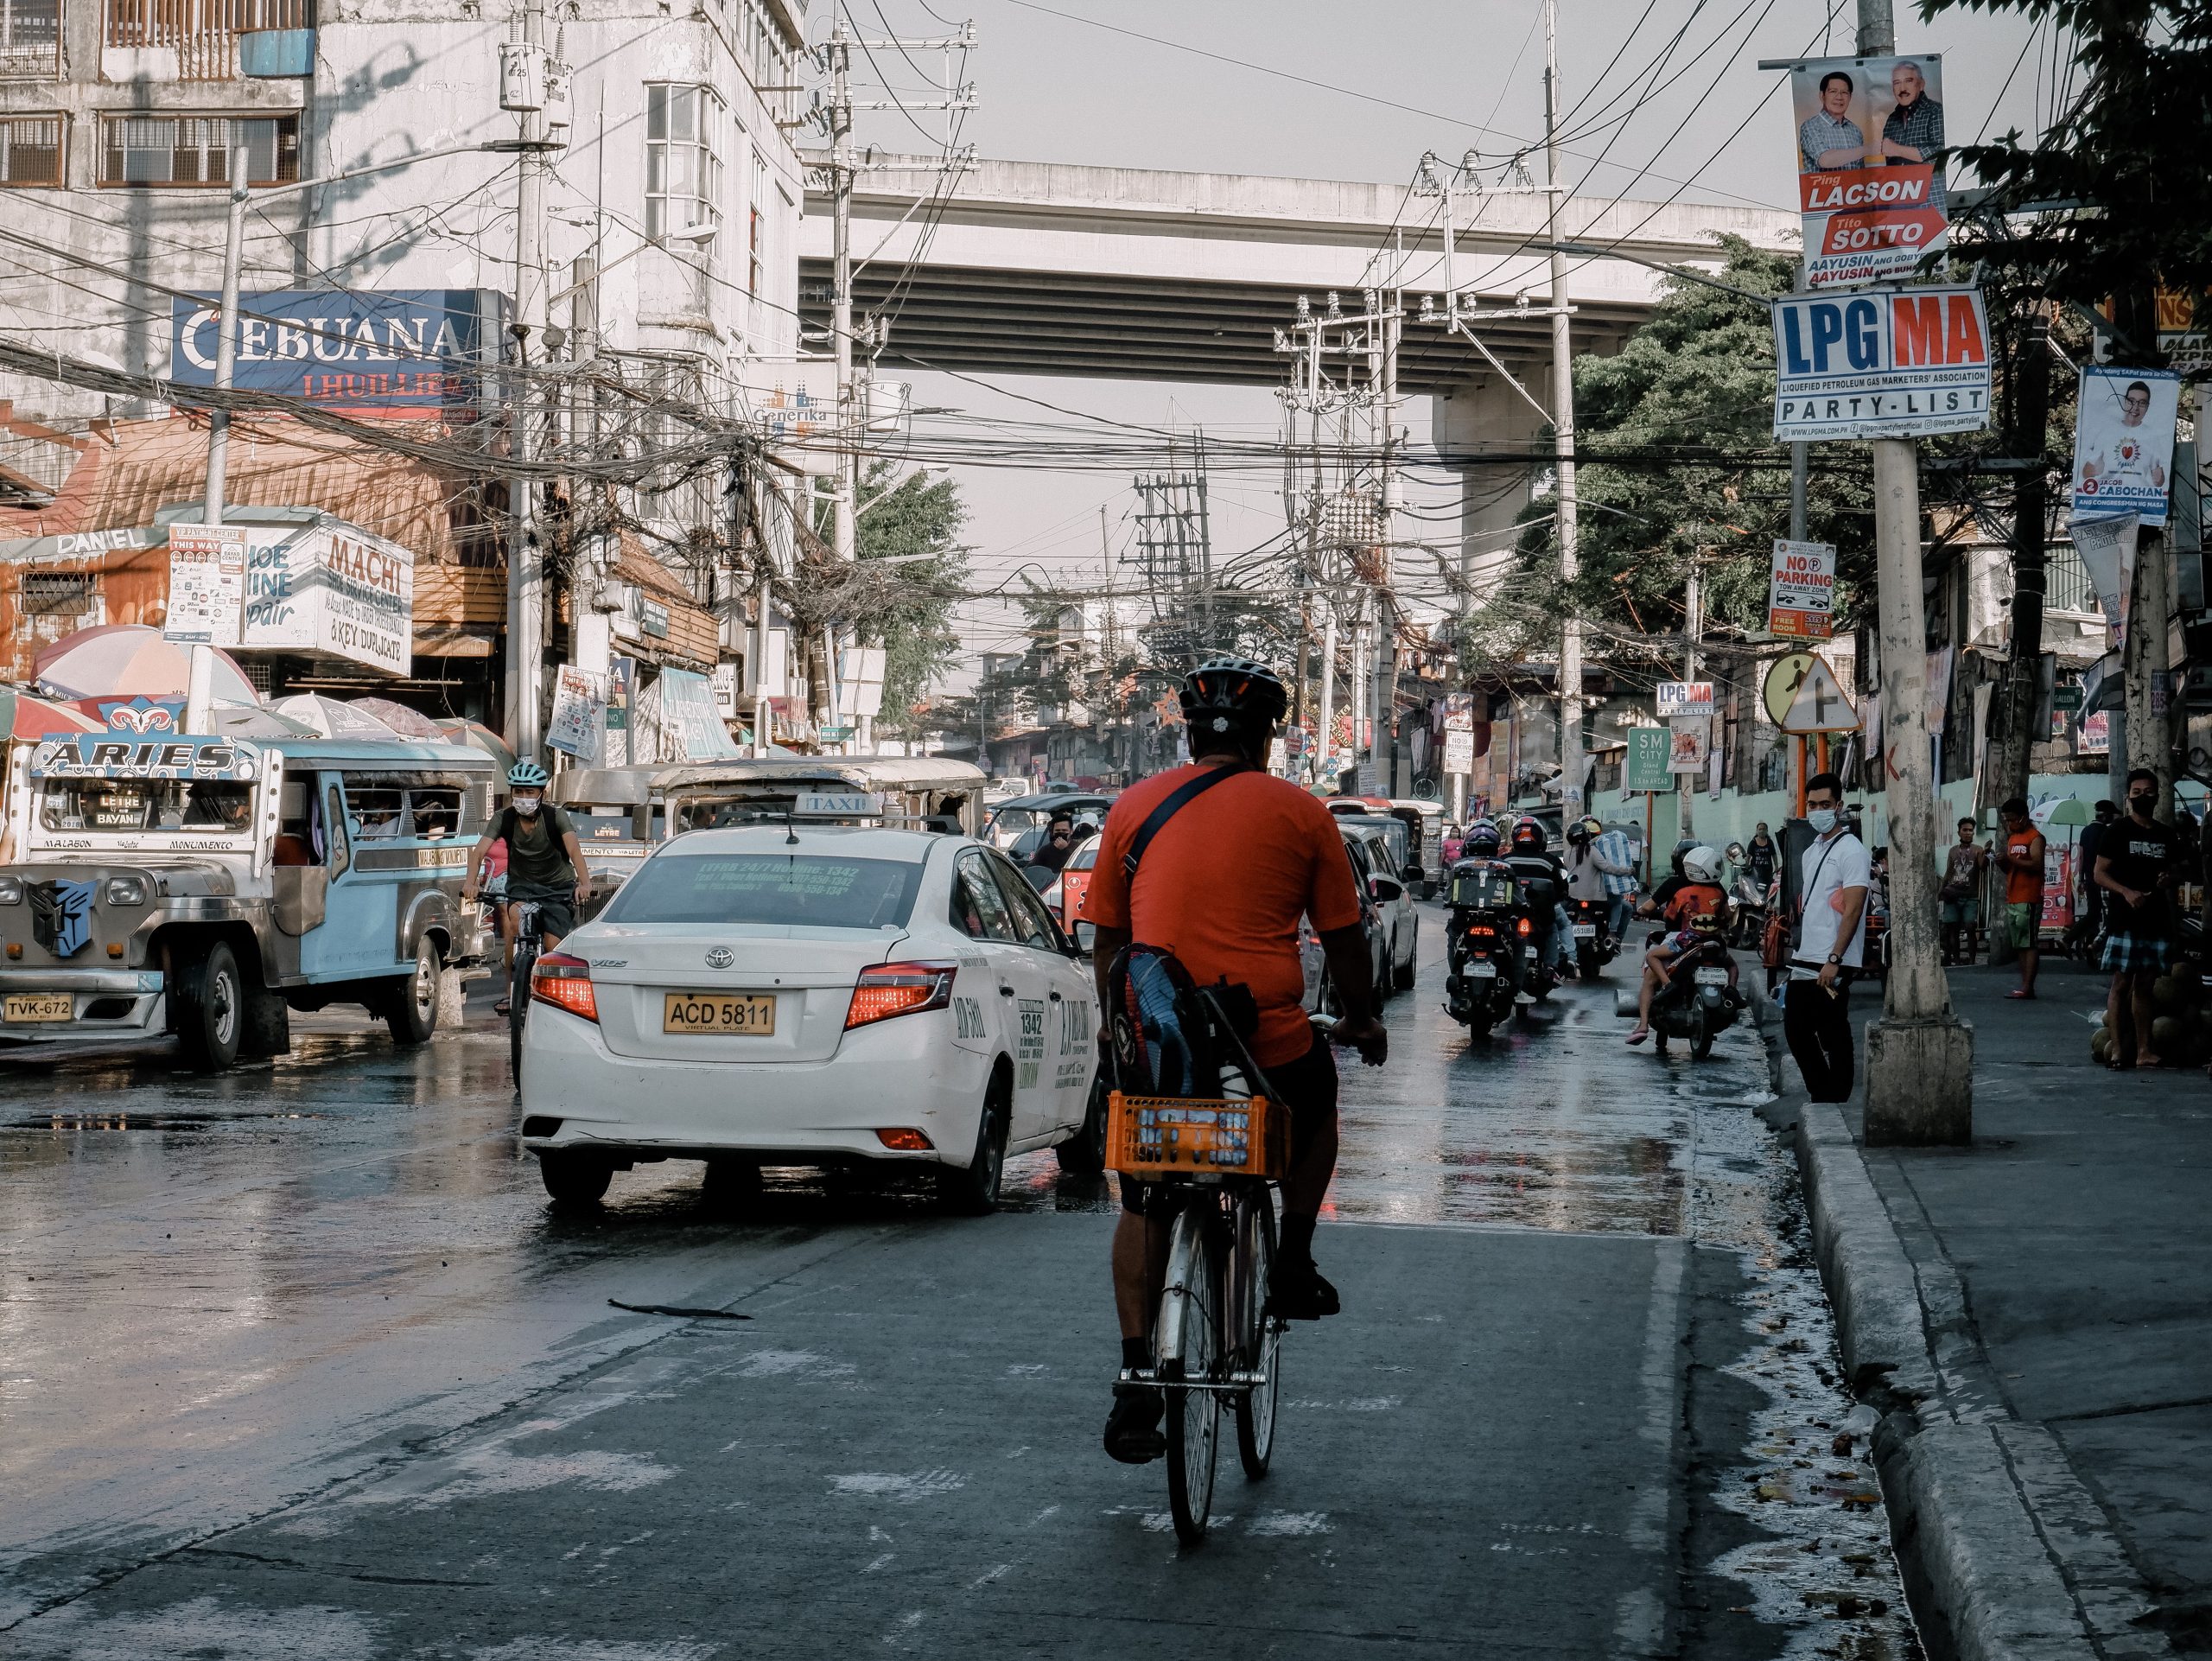 Man in Orange Shirt Riding a Bicycle on the Road Manila